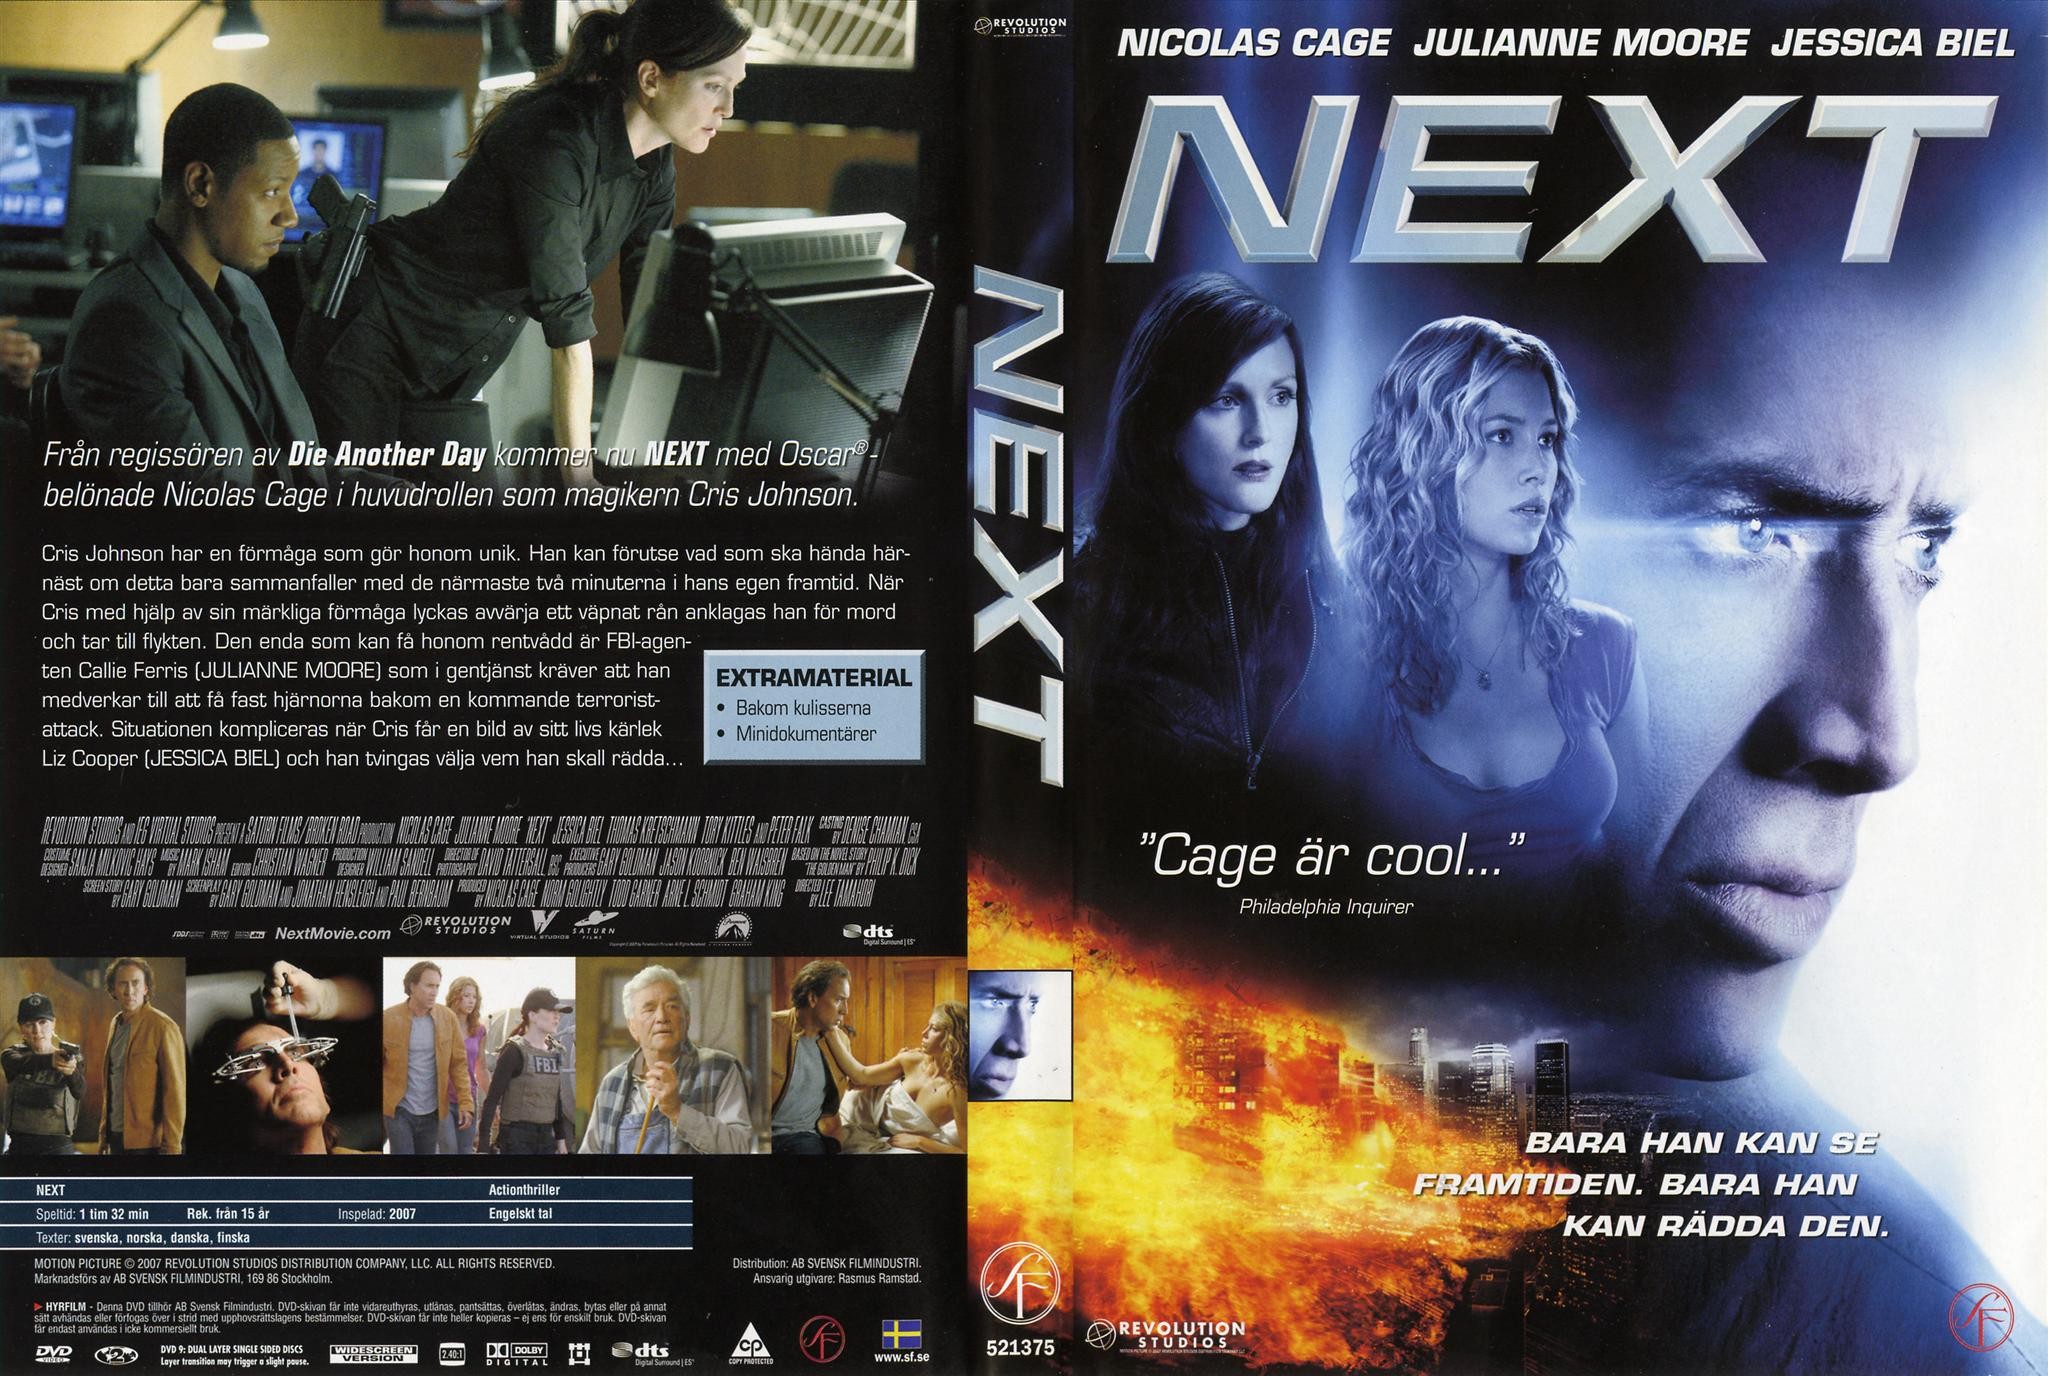 Covers Box Sk Next 2007 High Quality Dvd Blueray Movie He can see a few minutes into the future. dvd blueray movie